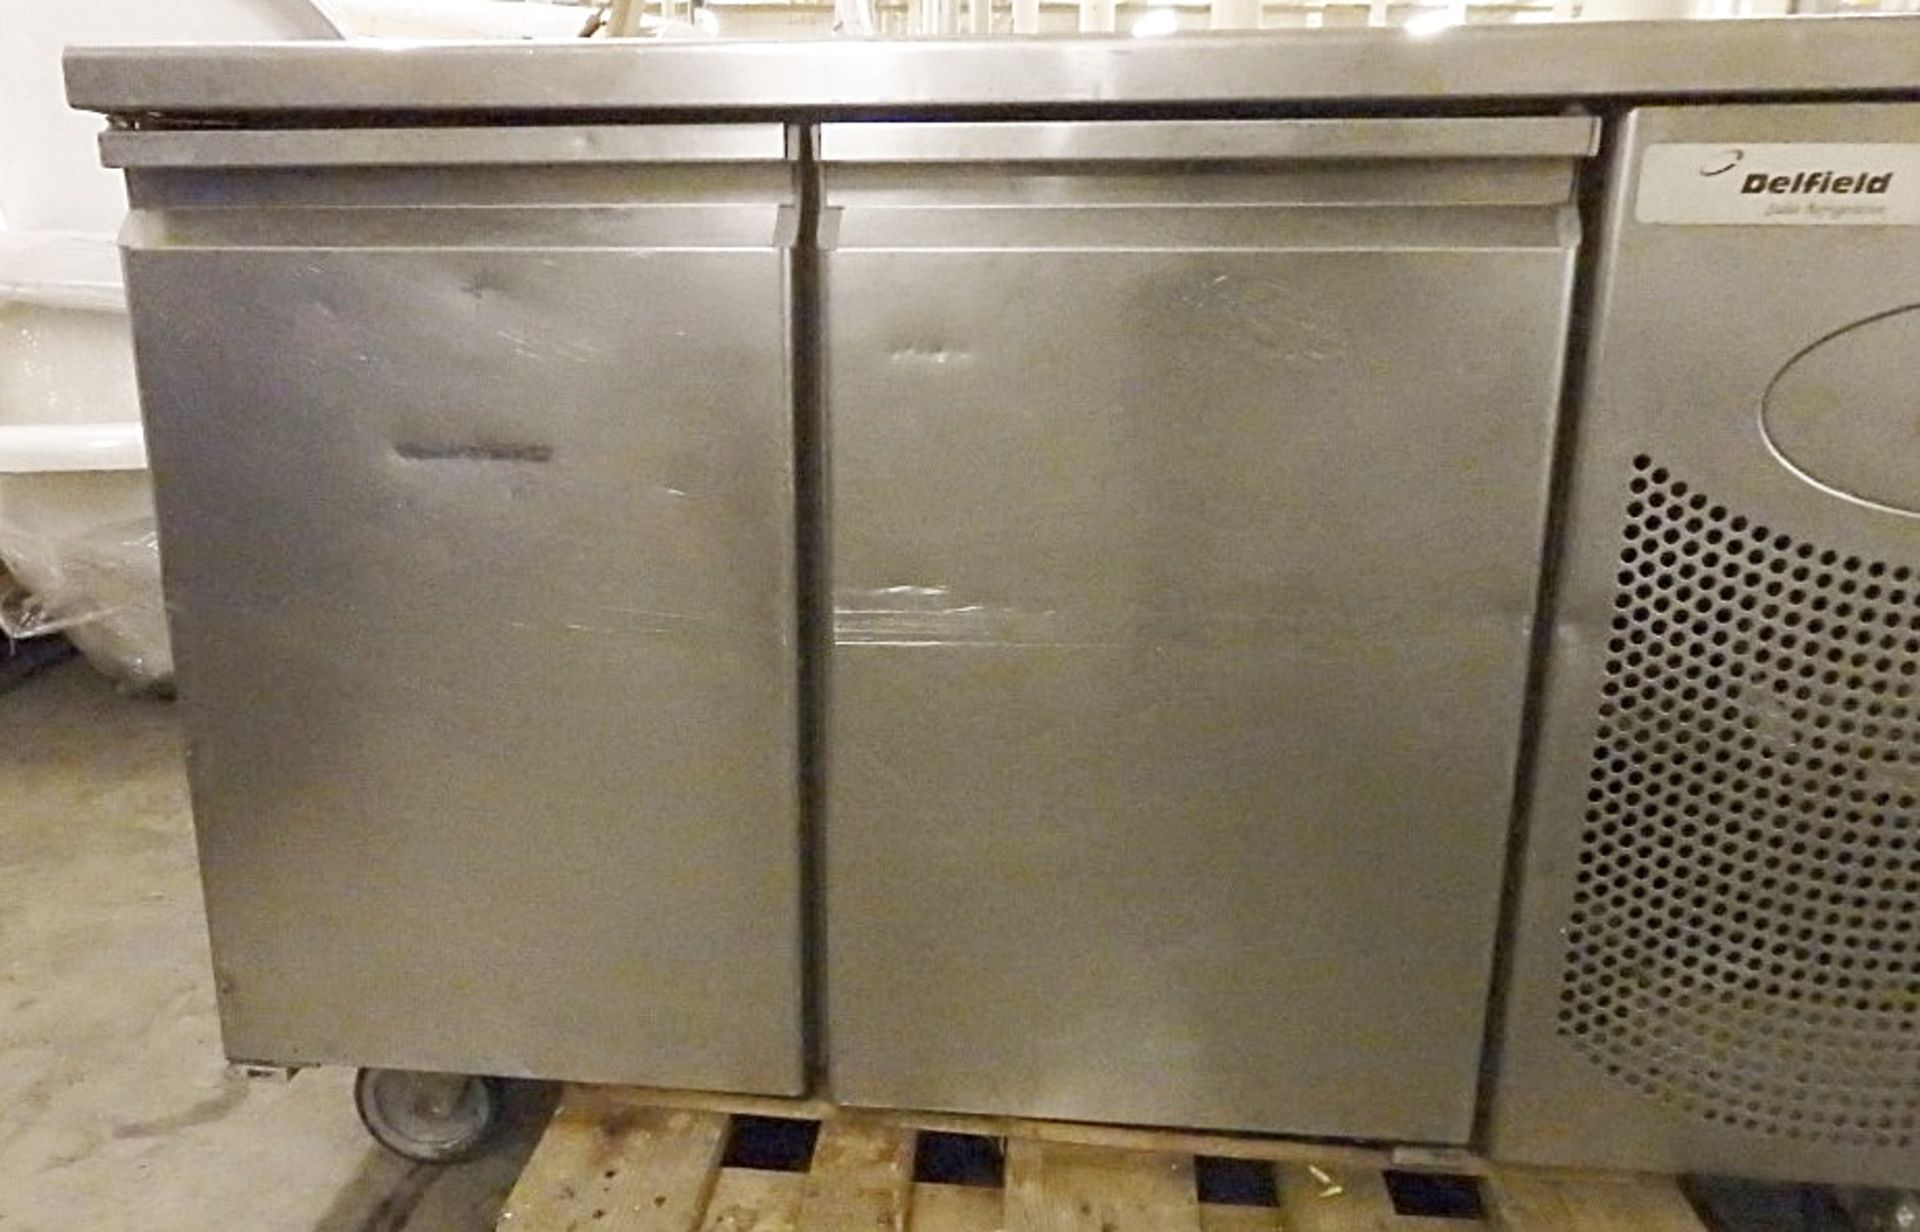 1 x "Delfield Sadia" Commercial Undercounter Refrigerator With 2-Door Storage And Stainless Steel